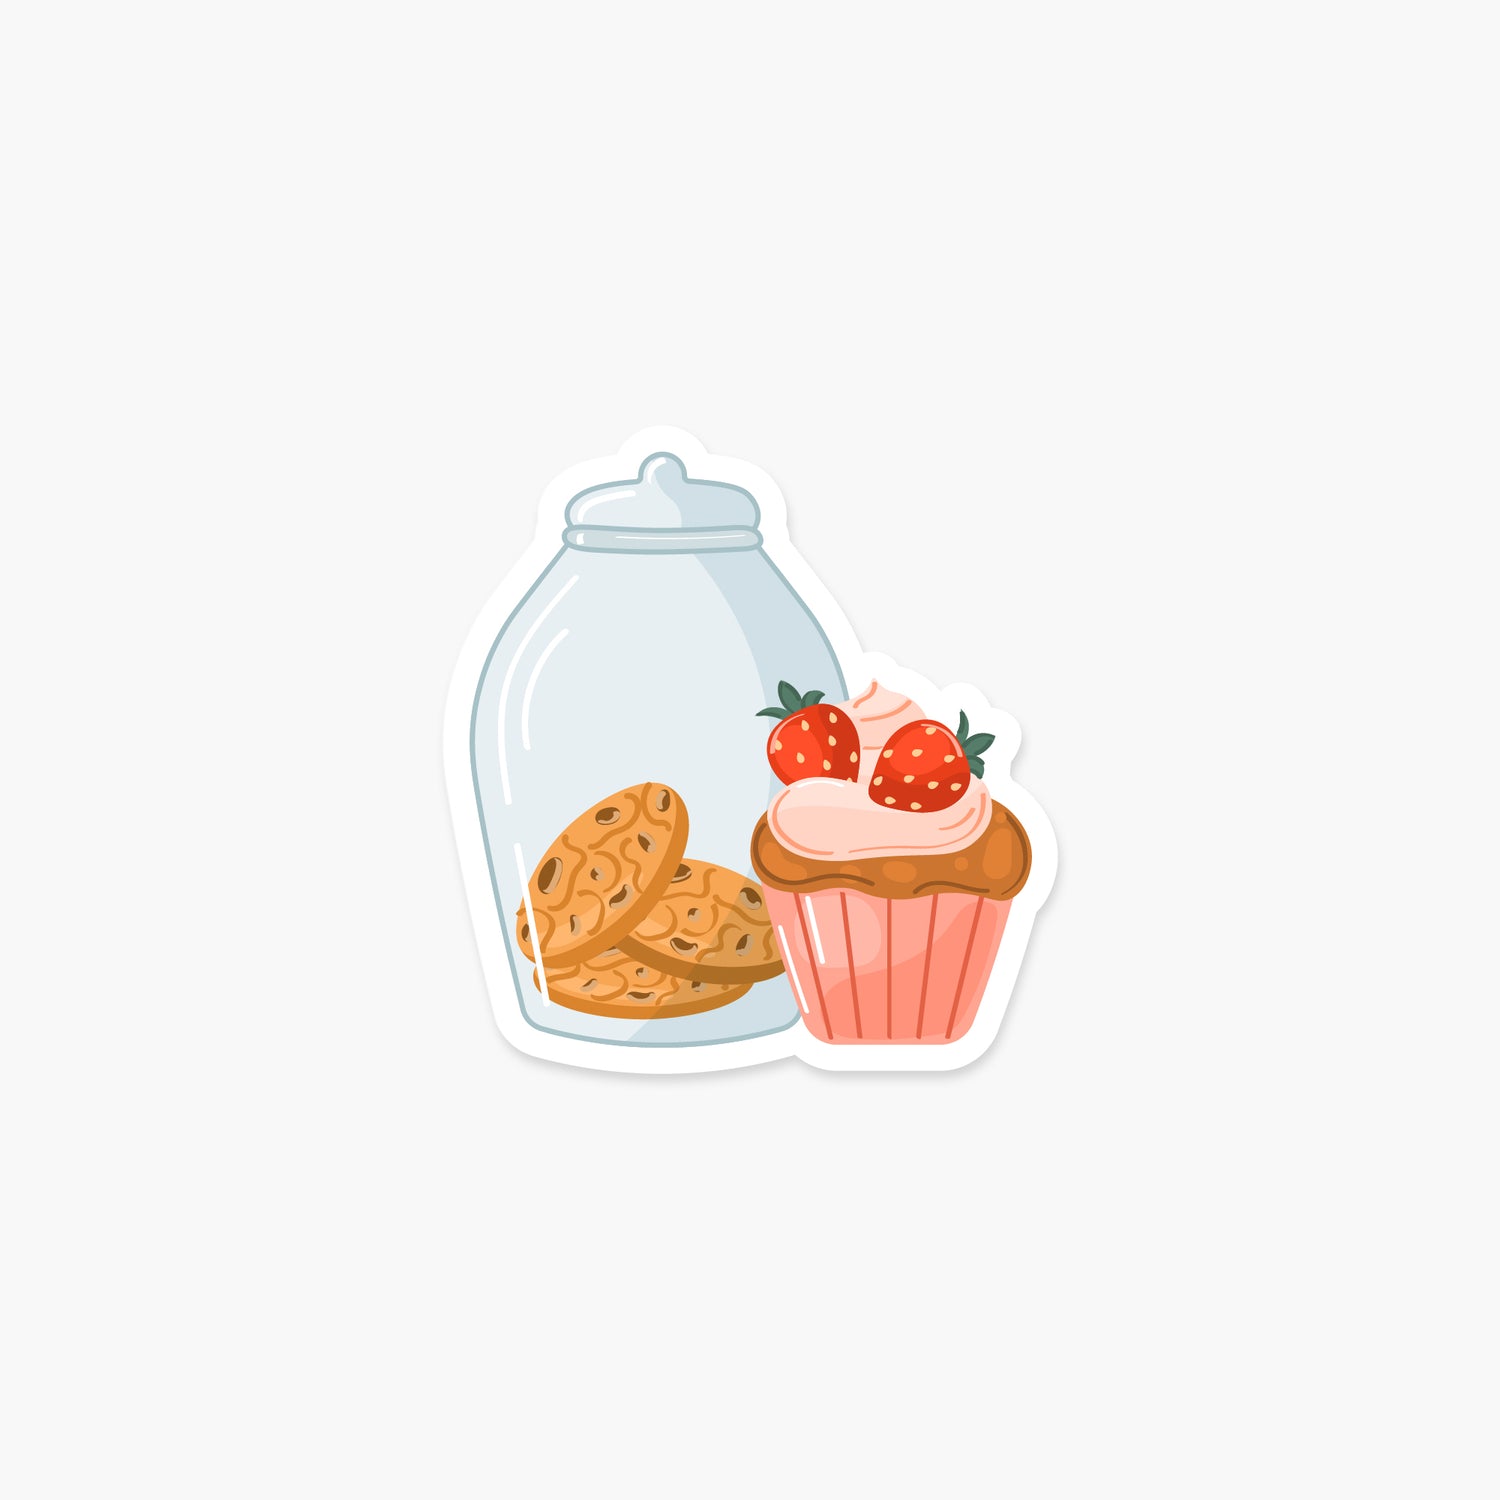 Jar of Cookies and a Strawberry Cupcake - Food Sticker | Footnotes Paper